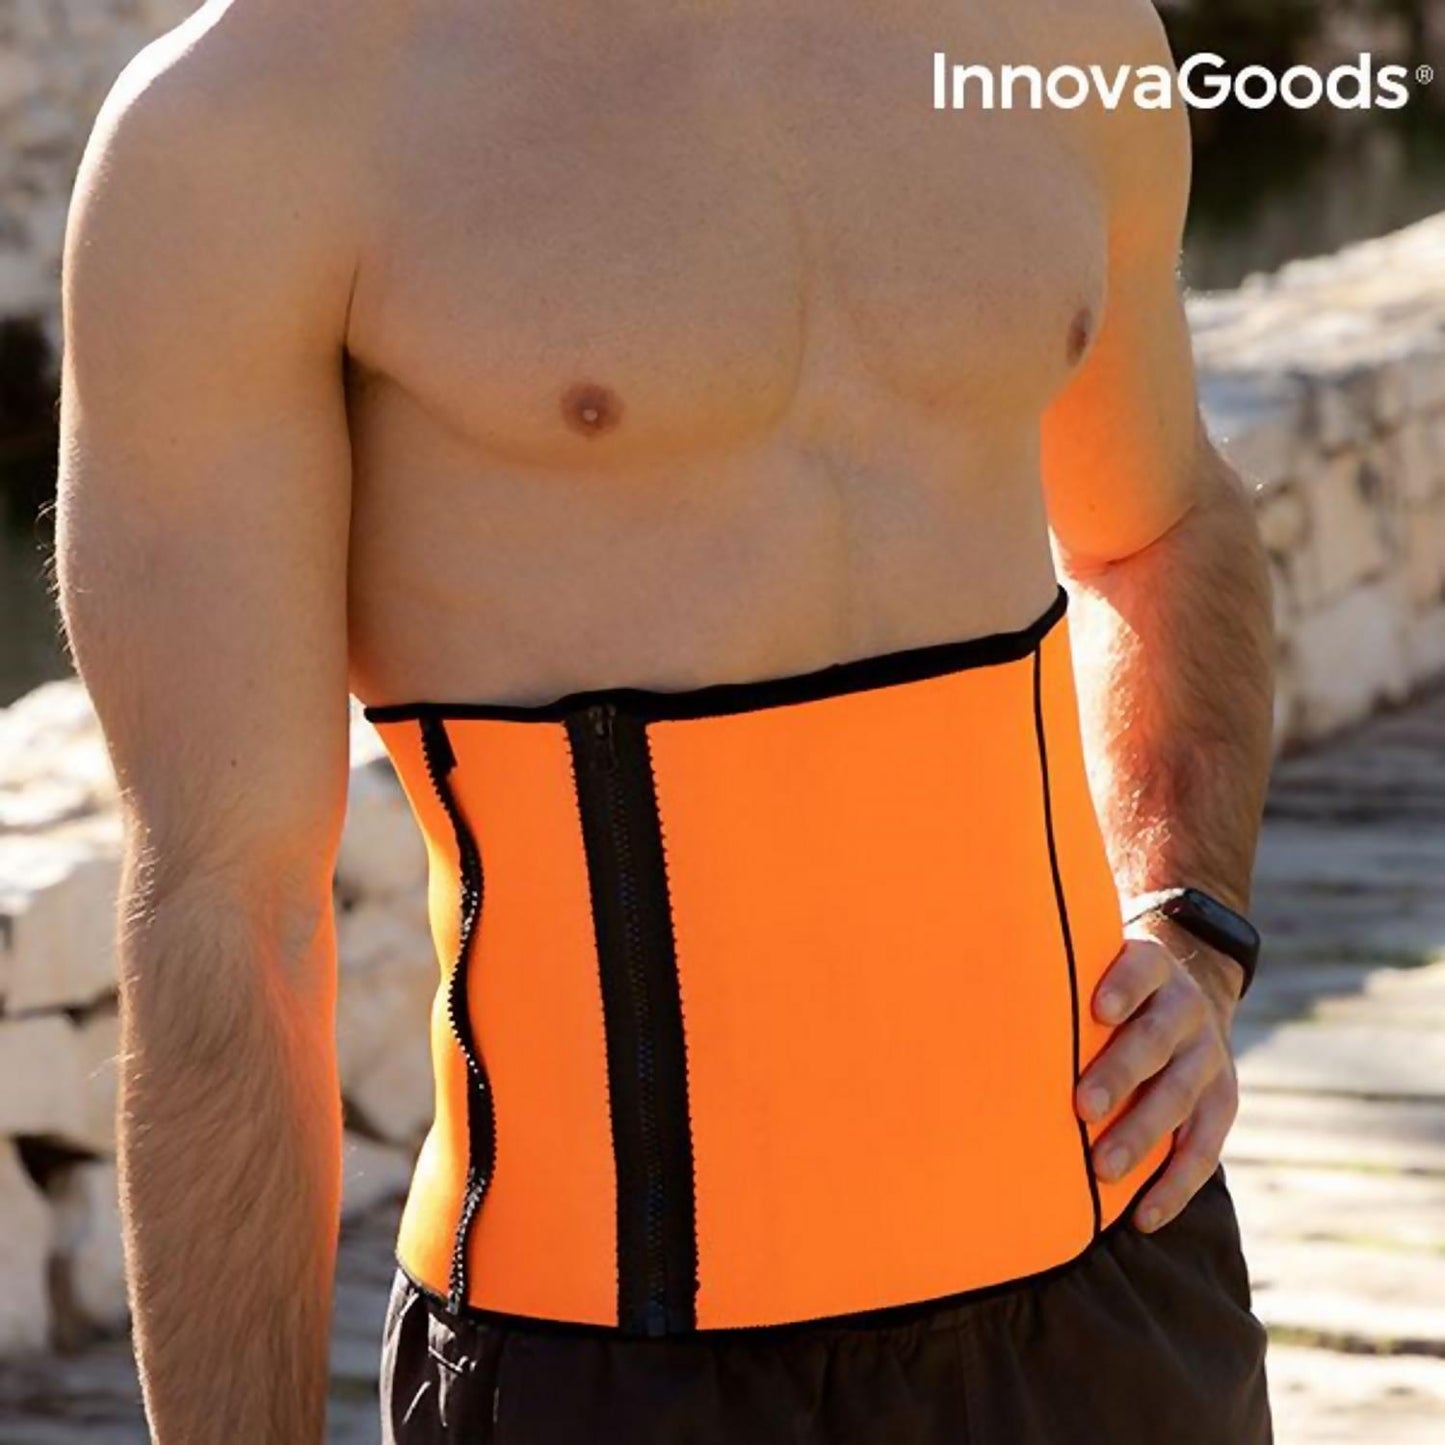 Waist Trainer Designed To Create A Sauna-Like Effect During Workouts